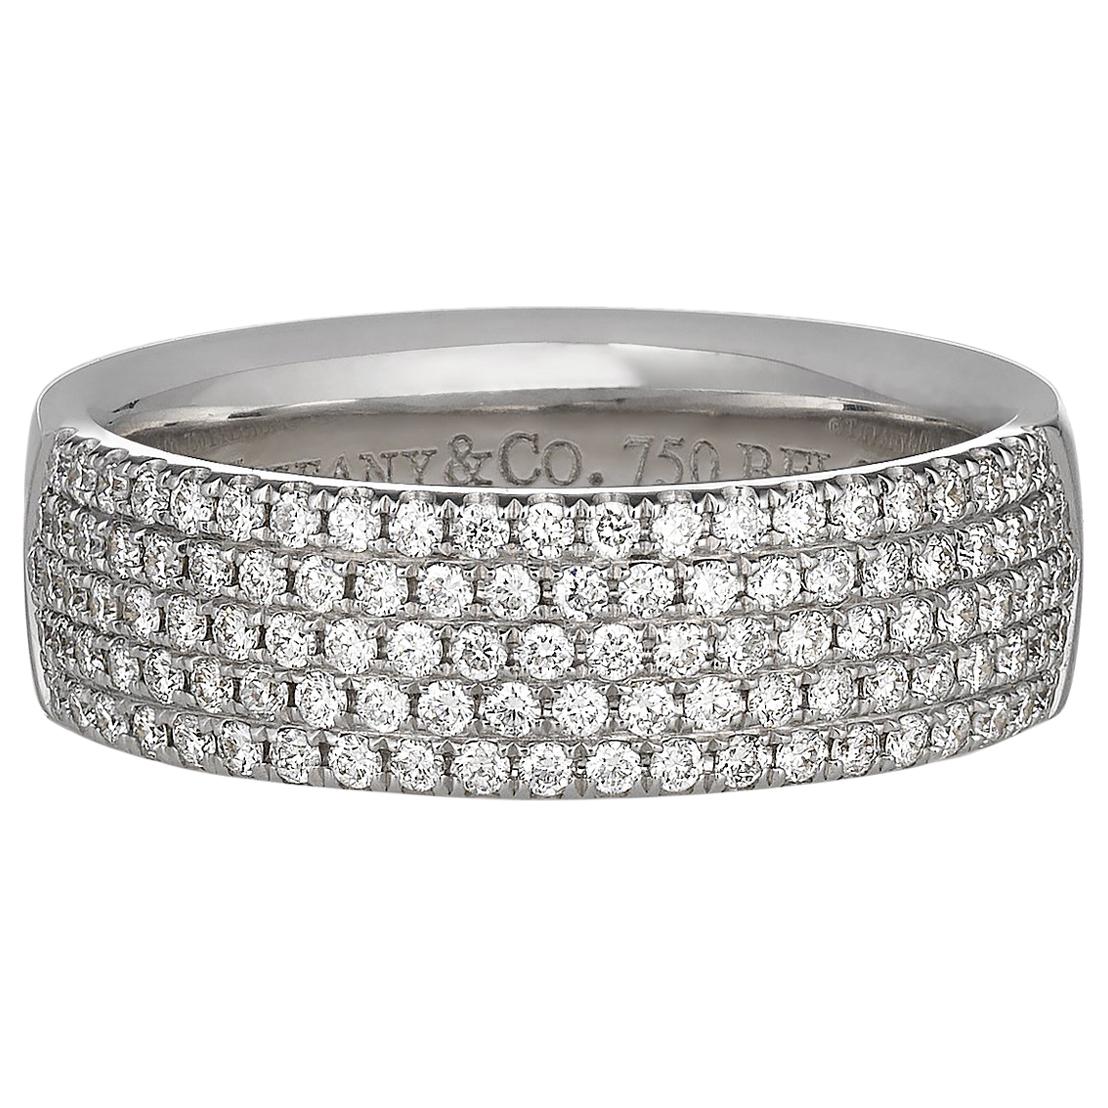 Tiffany & Co. White Gold and Pavé Diamond Band Ring